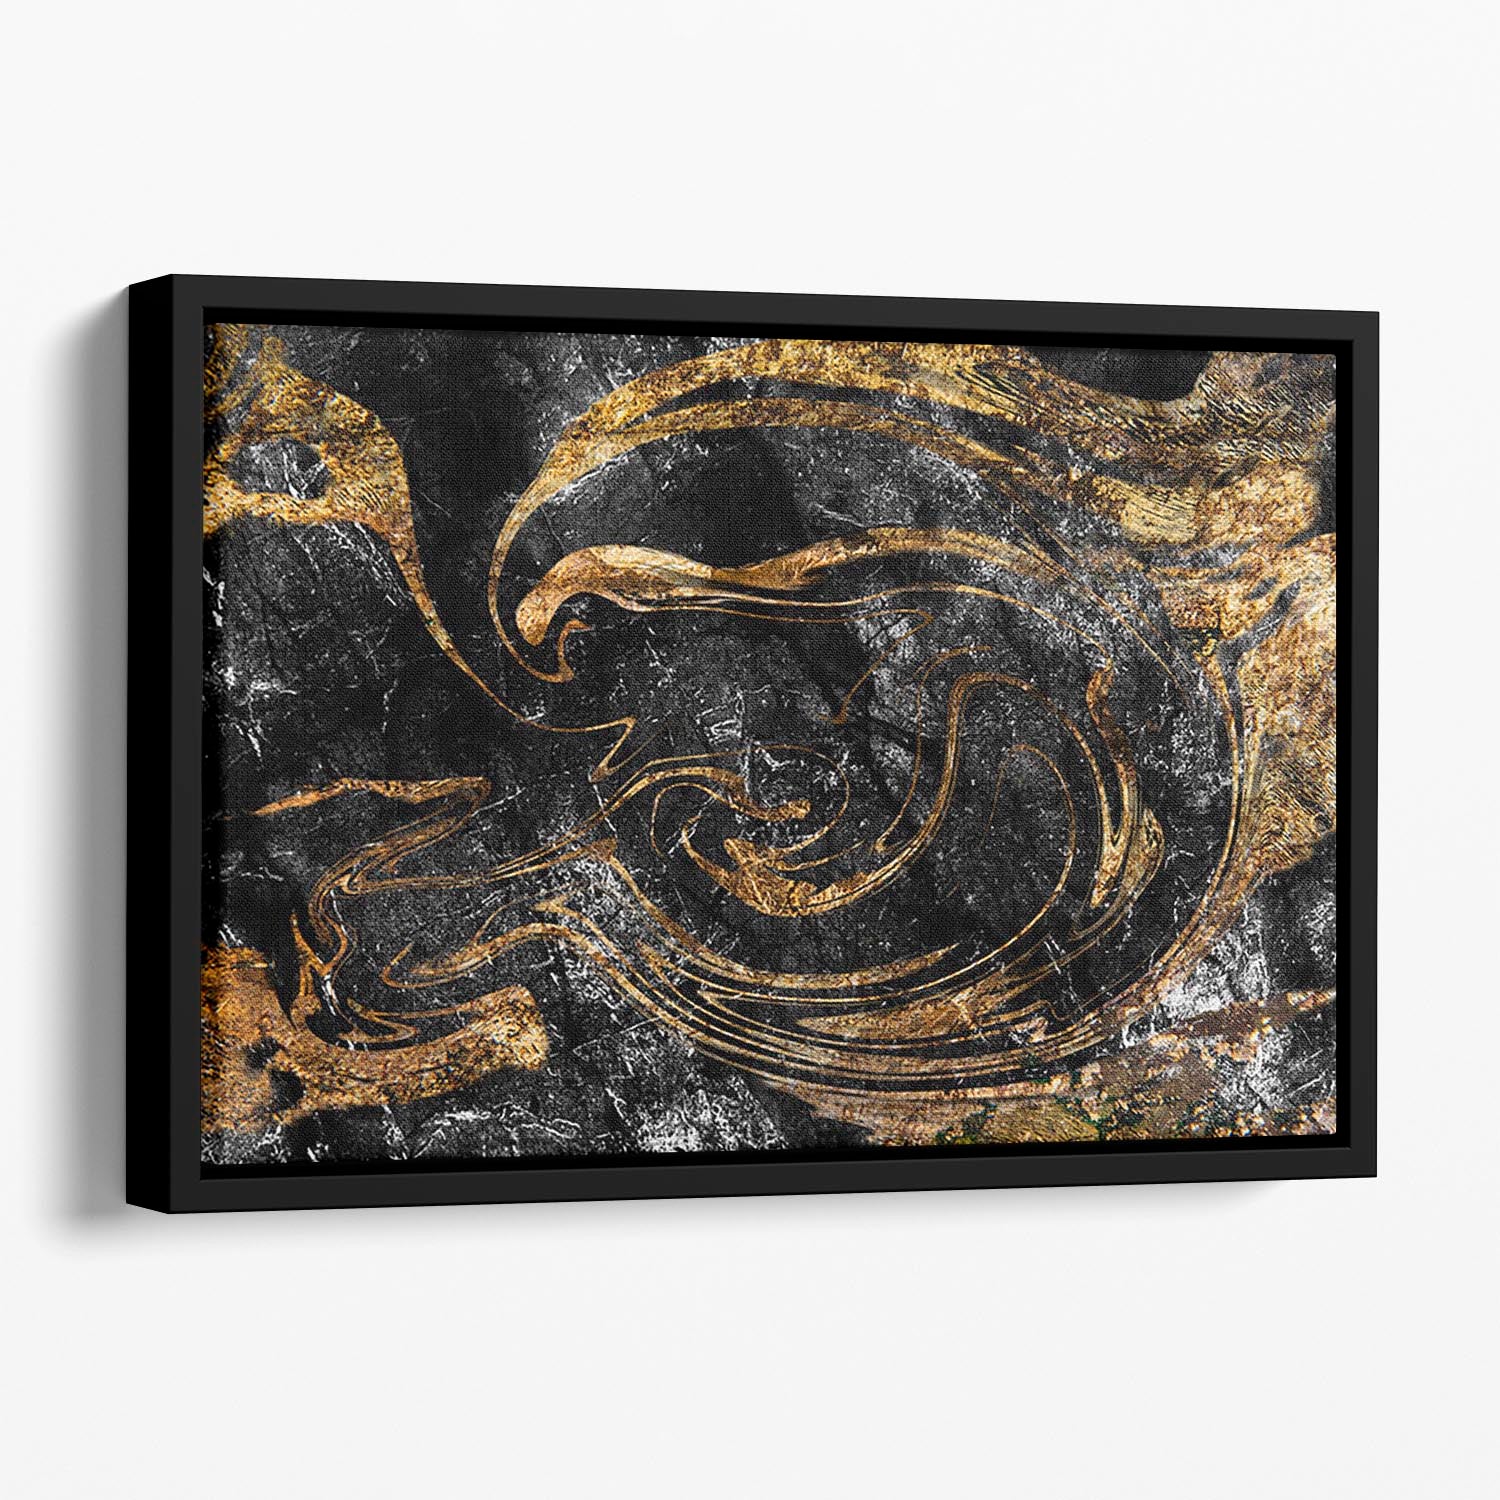 Black and Gold Swirled Marble Floating Framed Canvas - Canvas Art Rocks - 1